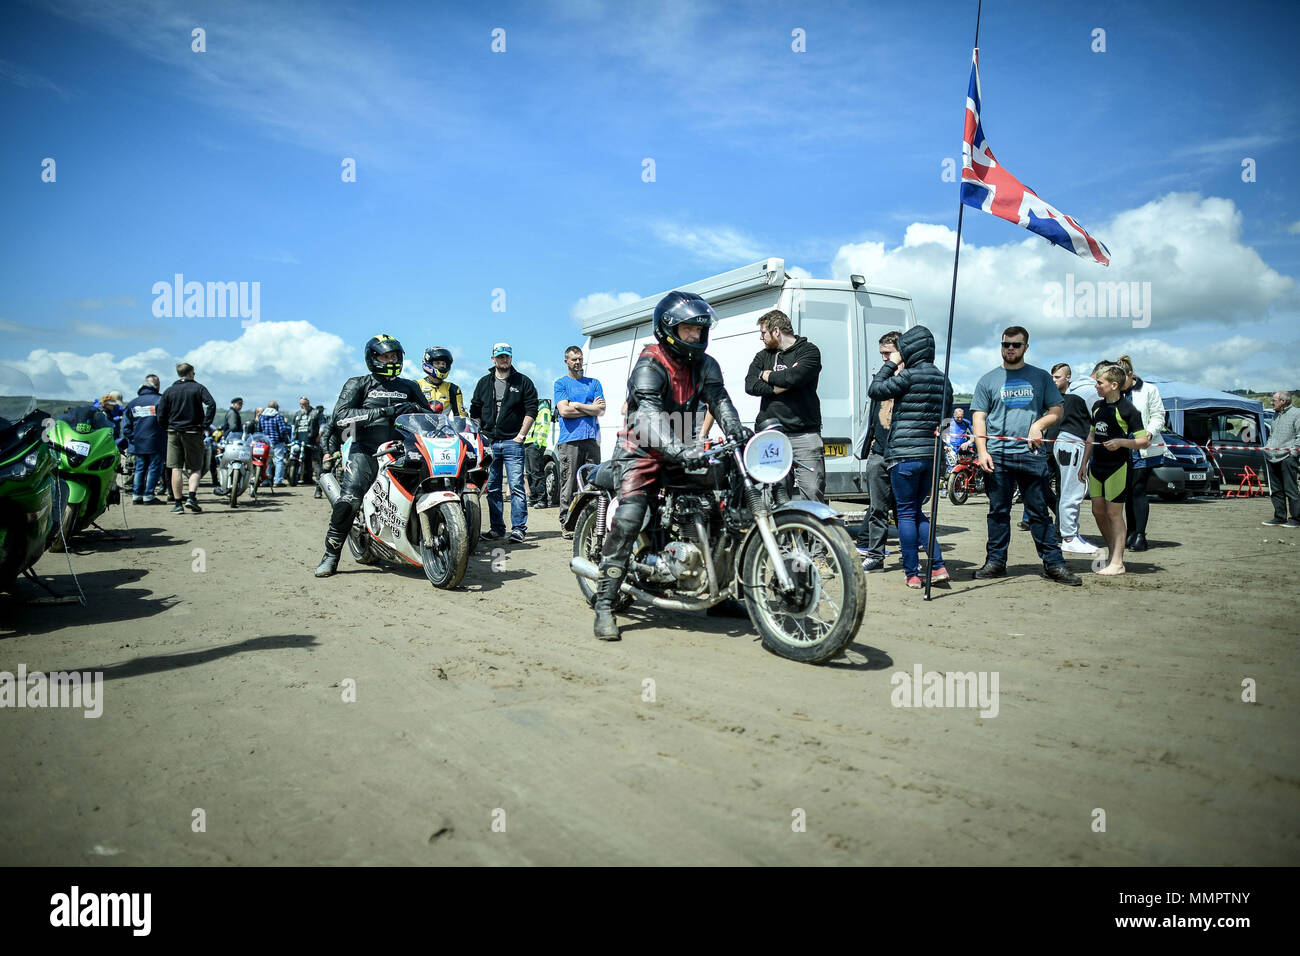 Competitors on motorbikes wait to take part in the annual UK, European and World land speed event organised by Straightliners, at Pendine Sands, Wales, where riders and drivers of all vehicle types compete in classes for top speeds over a measured mile on the beach. Stock Photo